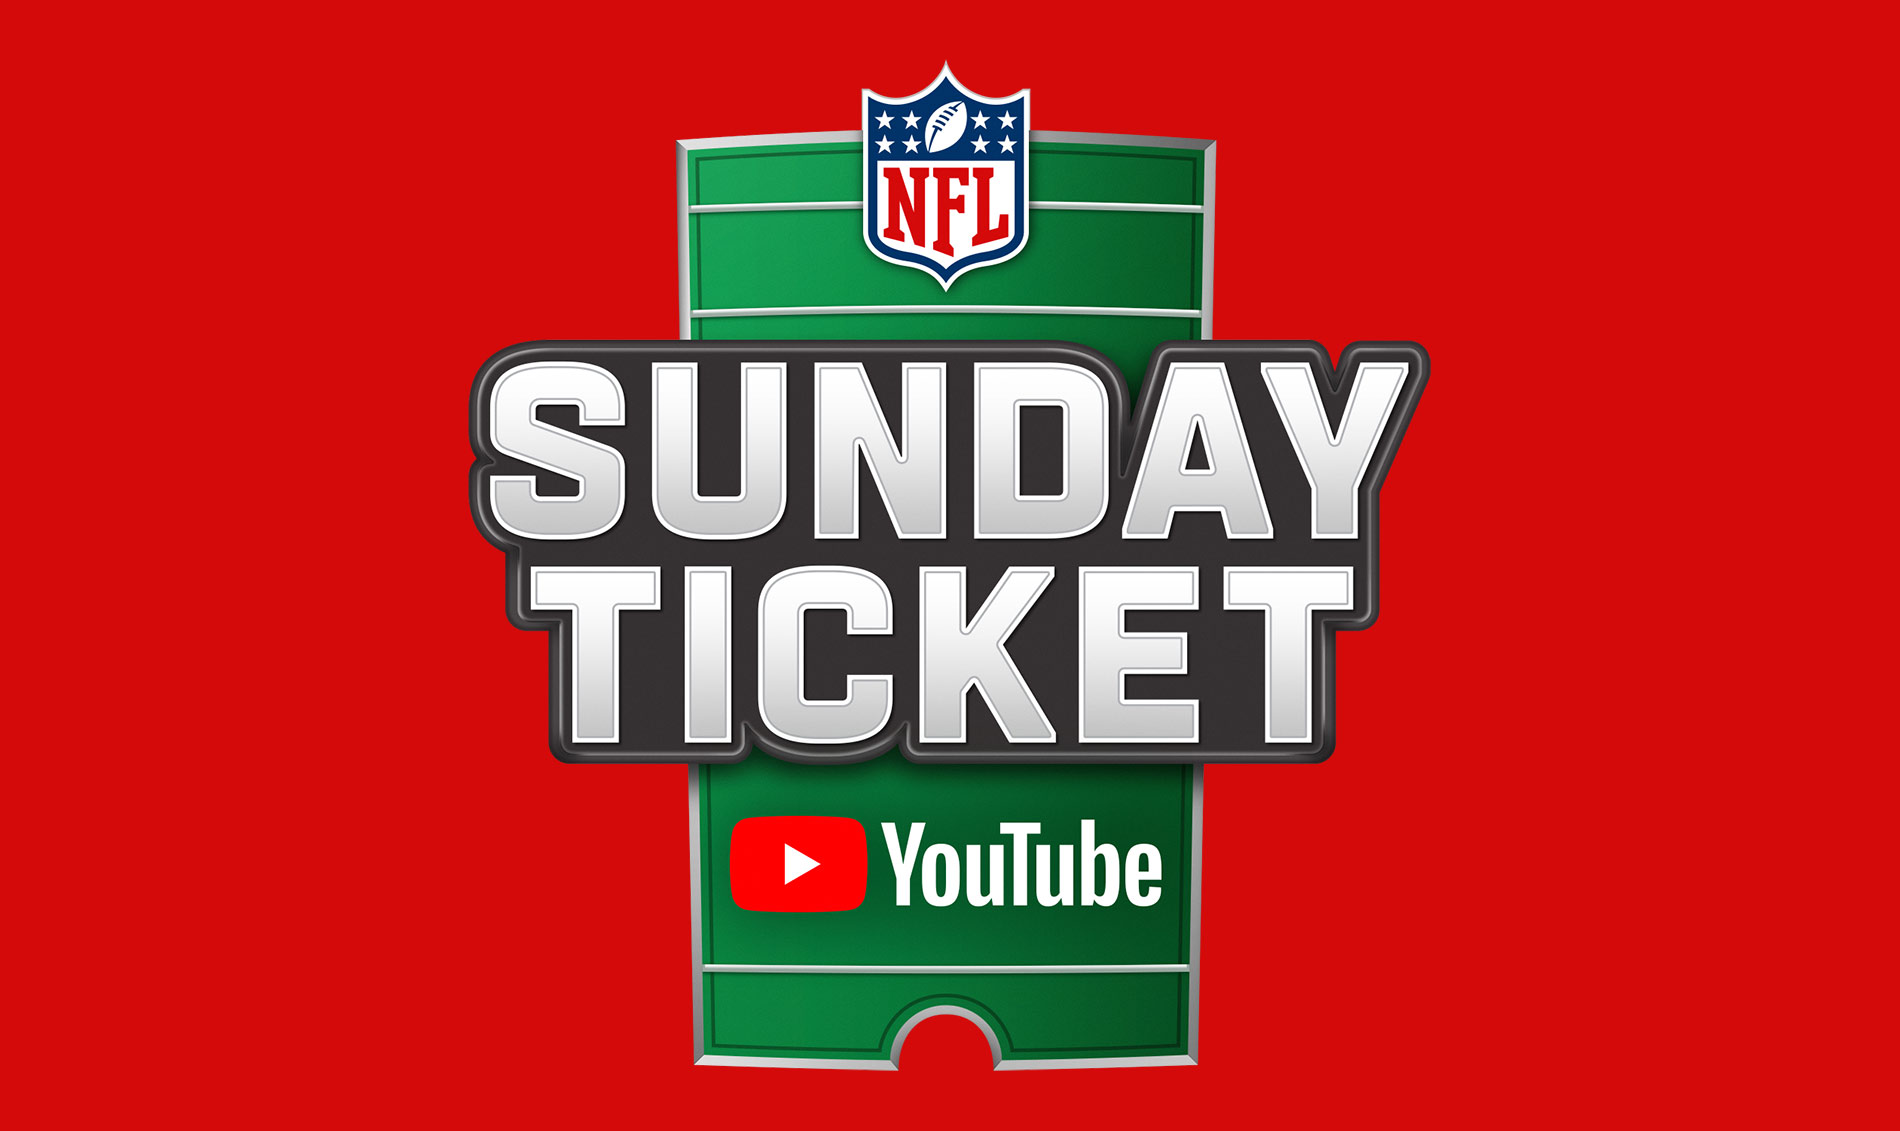 youtube nfl package